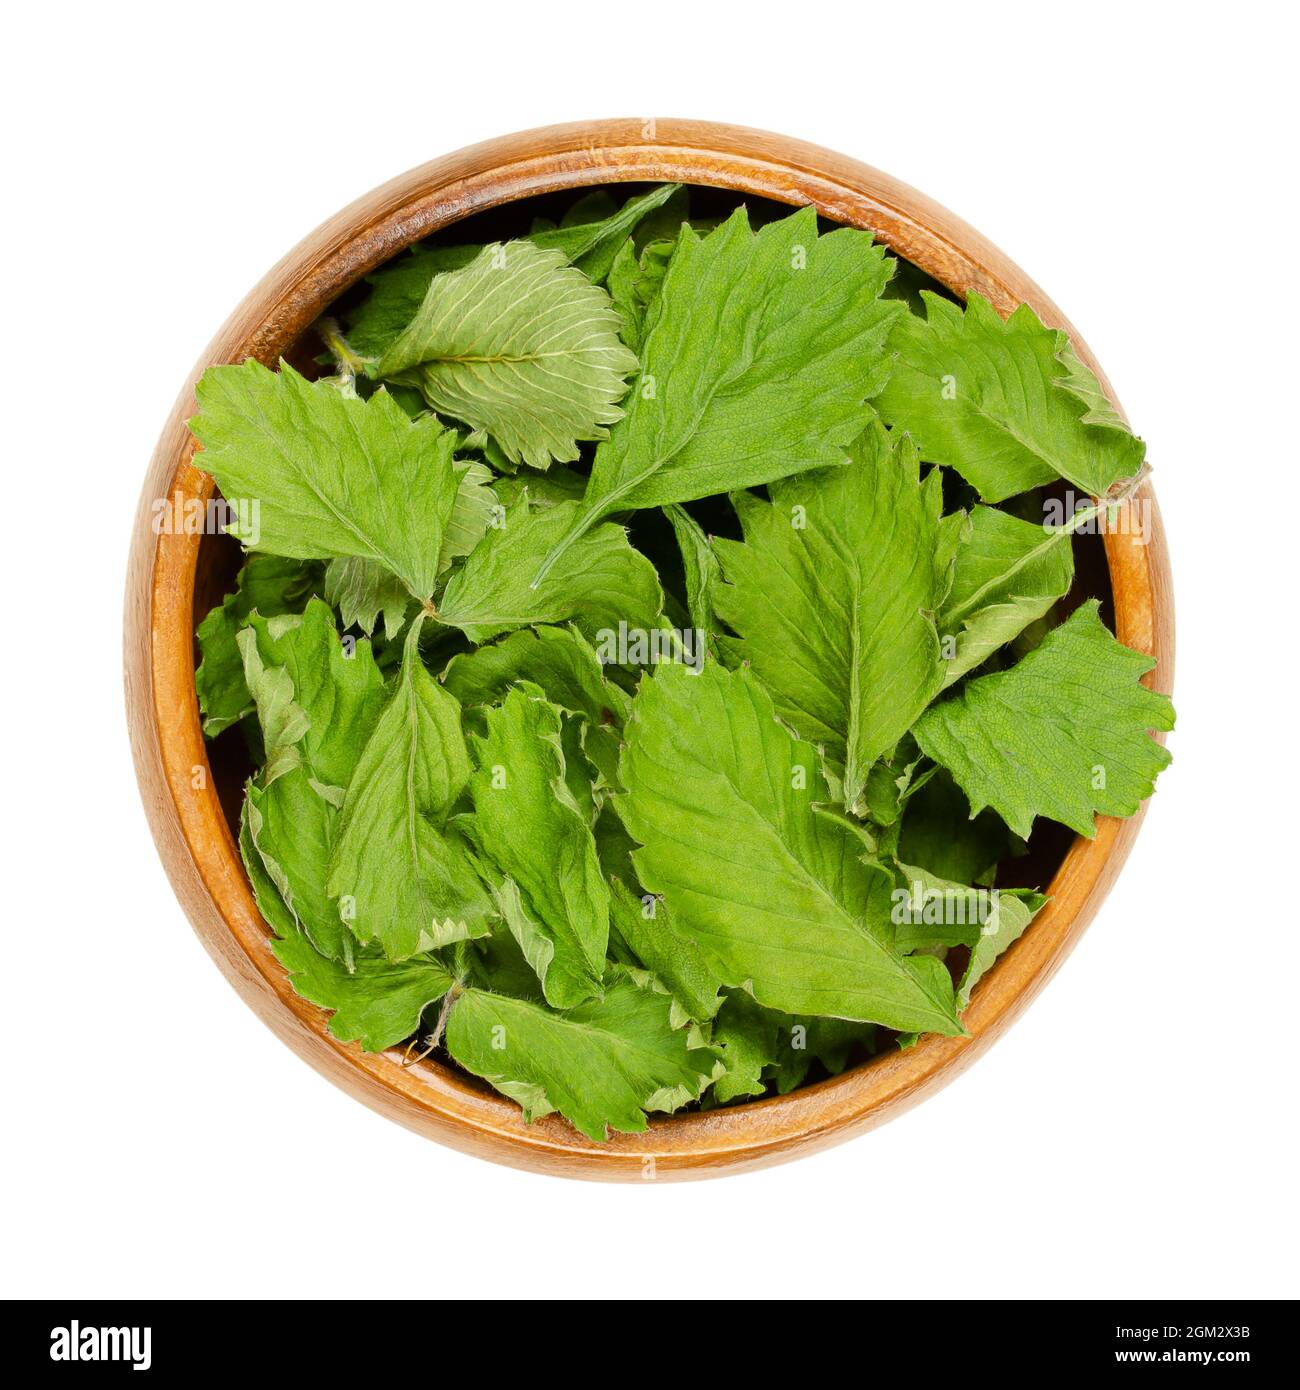 Dried wild strawberry leaves, in a wooden bowl. Leaves of Fragaria vesca, also known as European, woodland, Alpine or Carpathian strawberry. Stock Photo